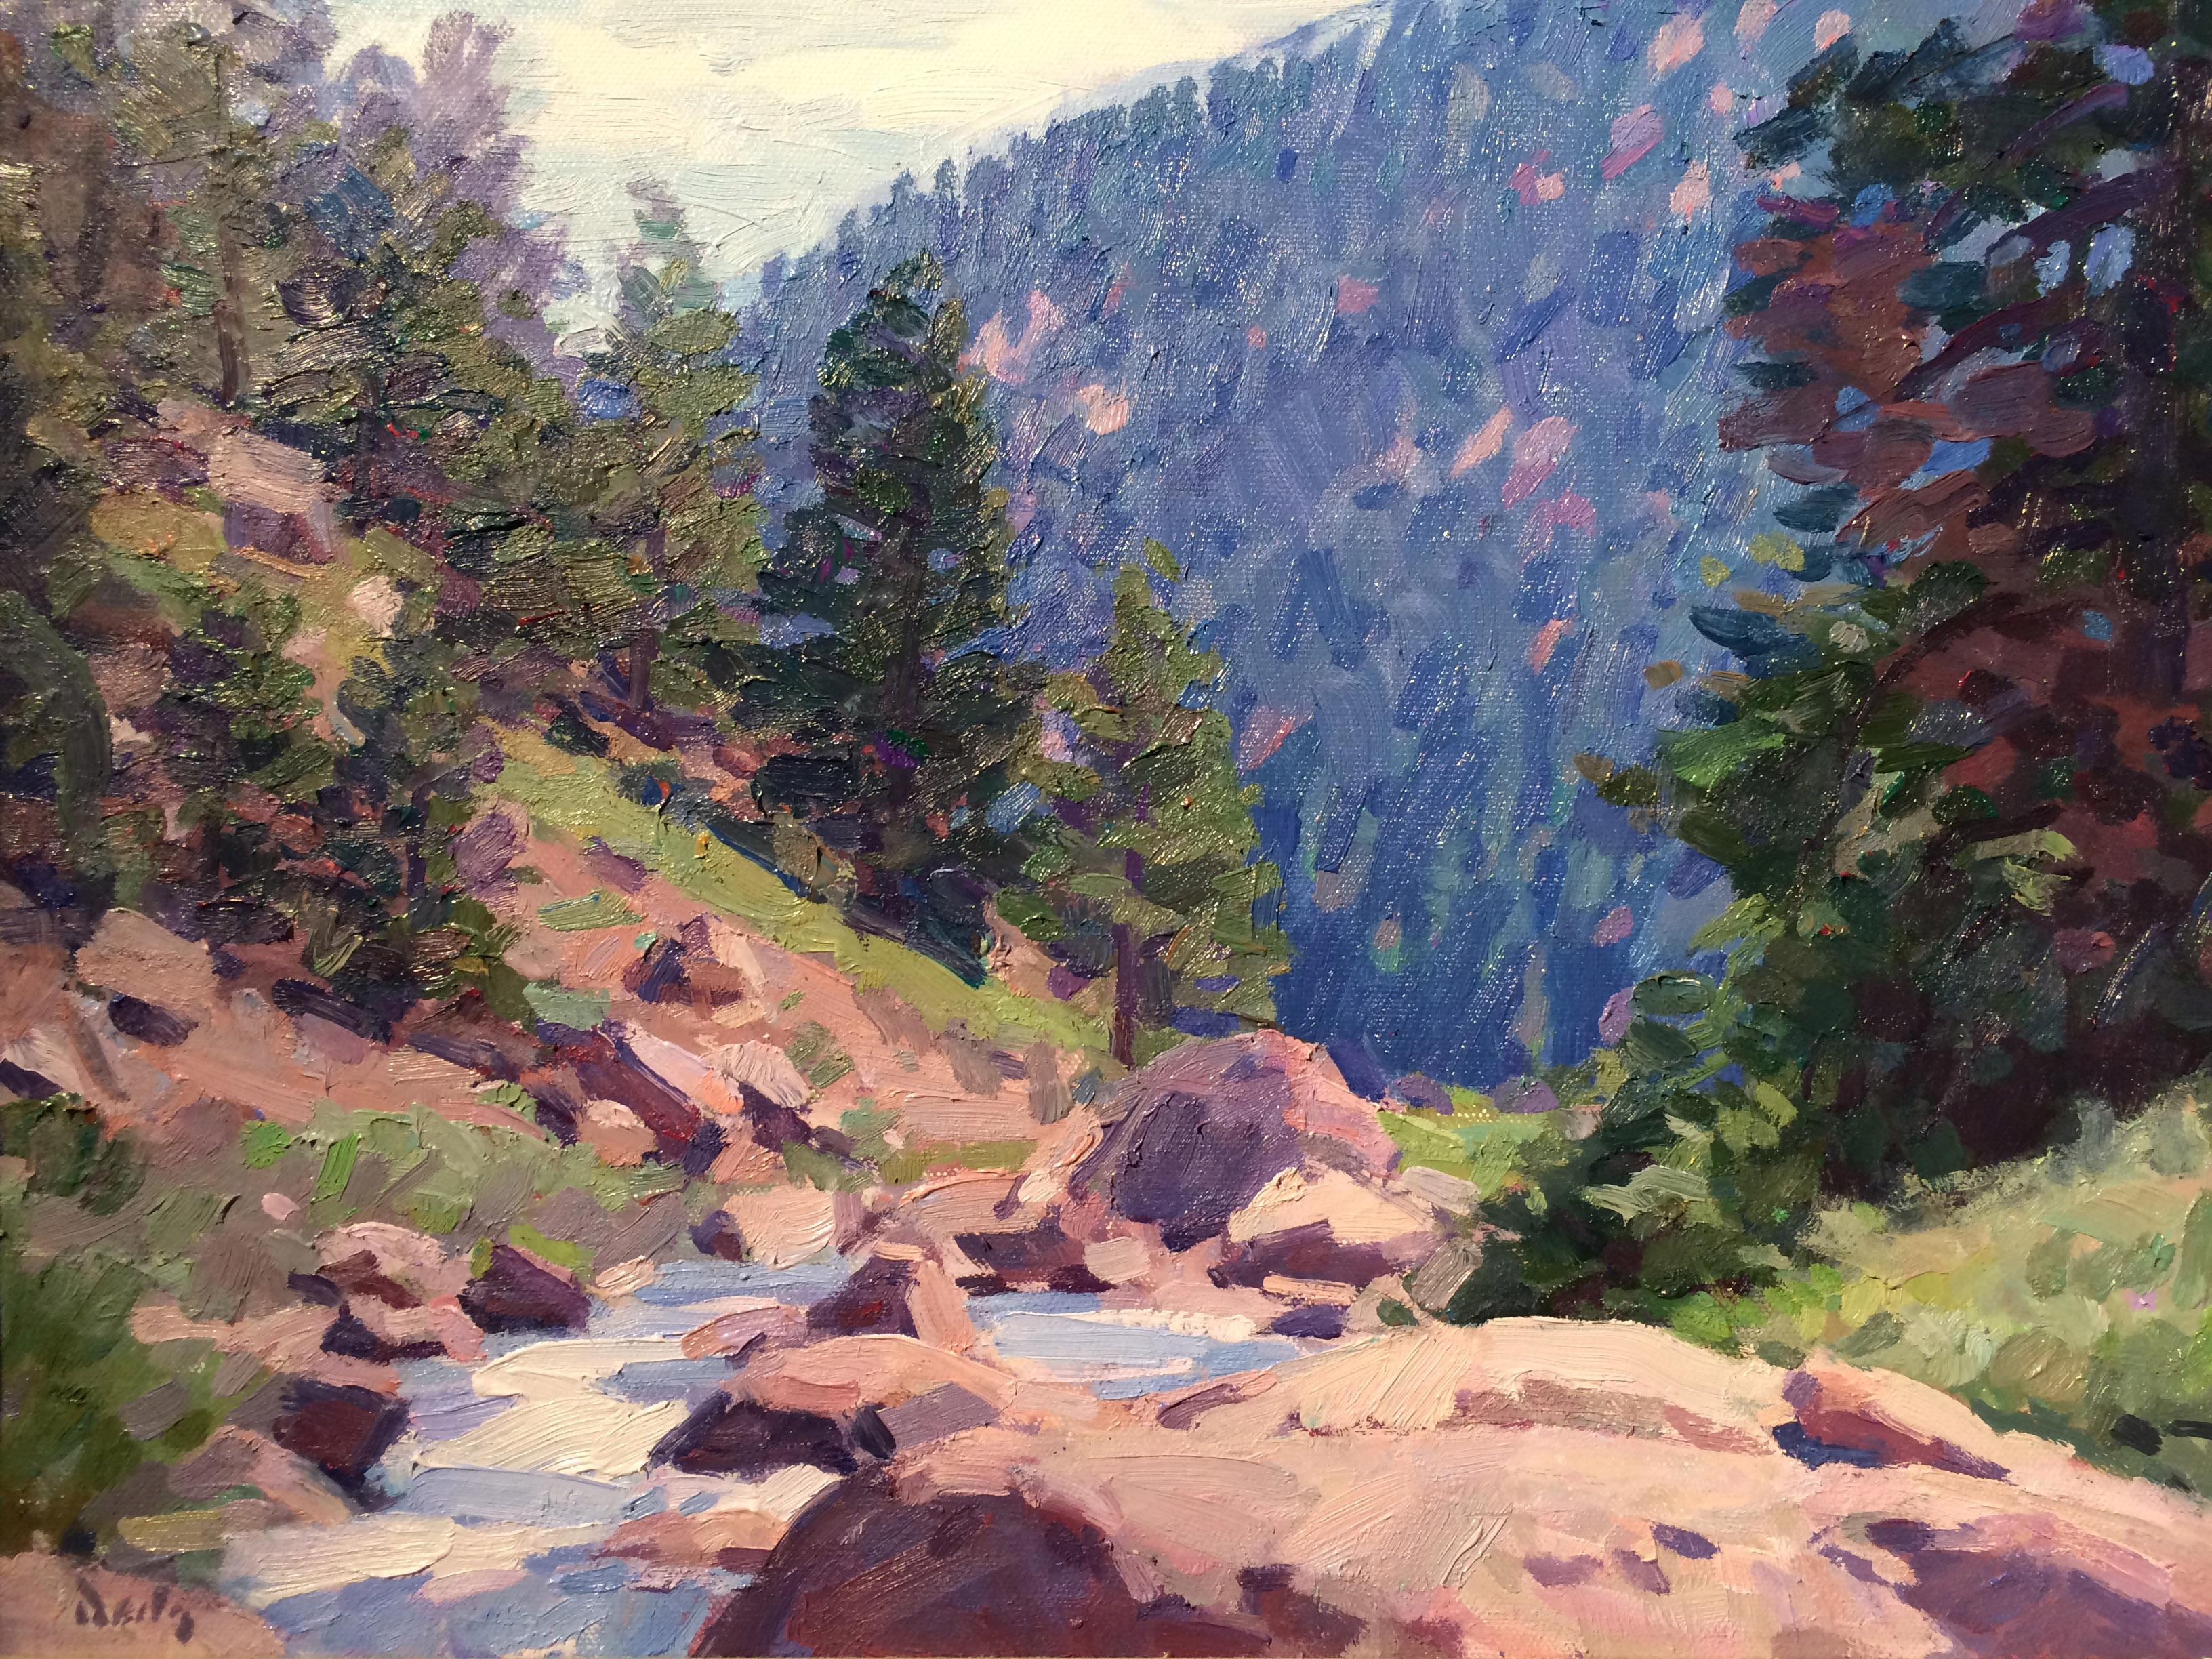 Figurative Painting Mark Daily - Peinture à l'huile « Afternoon on the North Fork Platte » (Afternoon on the North Fork Platte)